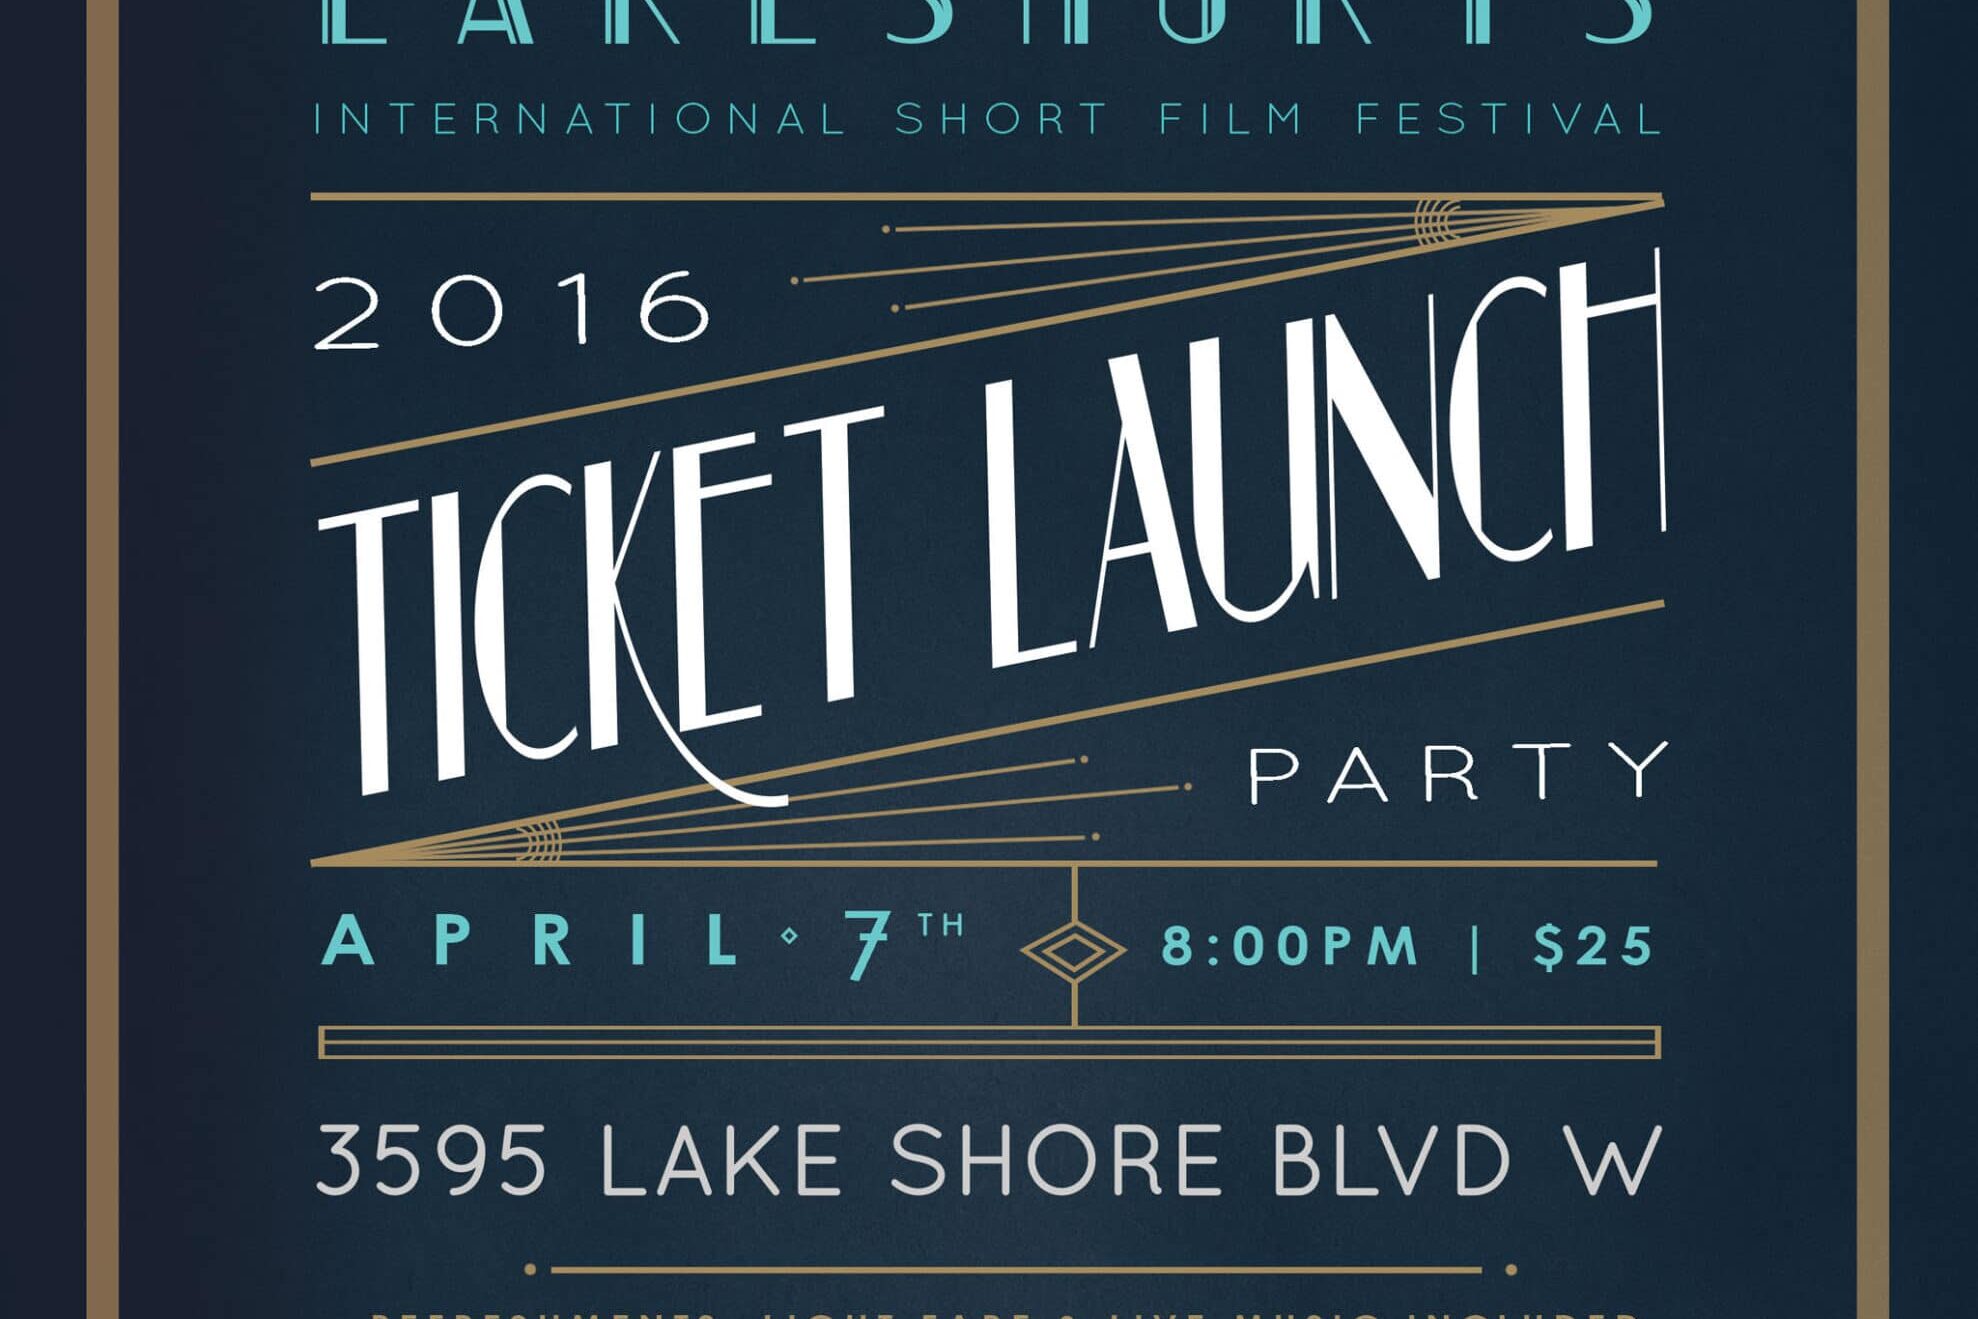 Lakeshorts Ticket Launch Party